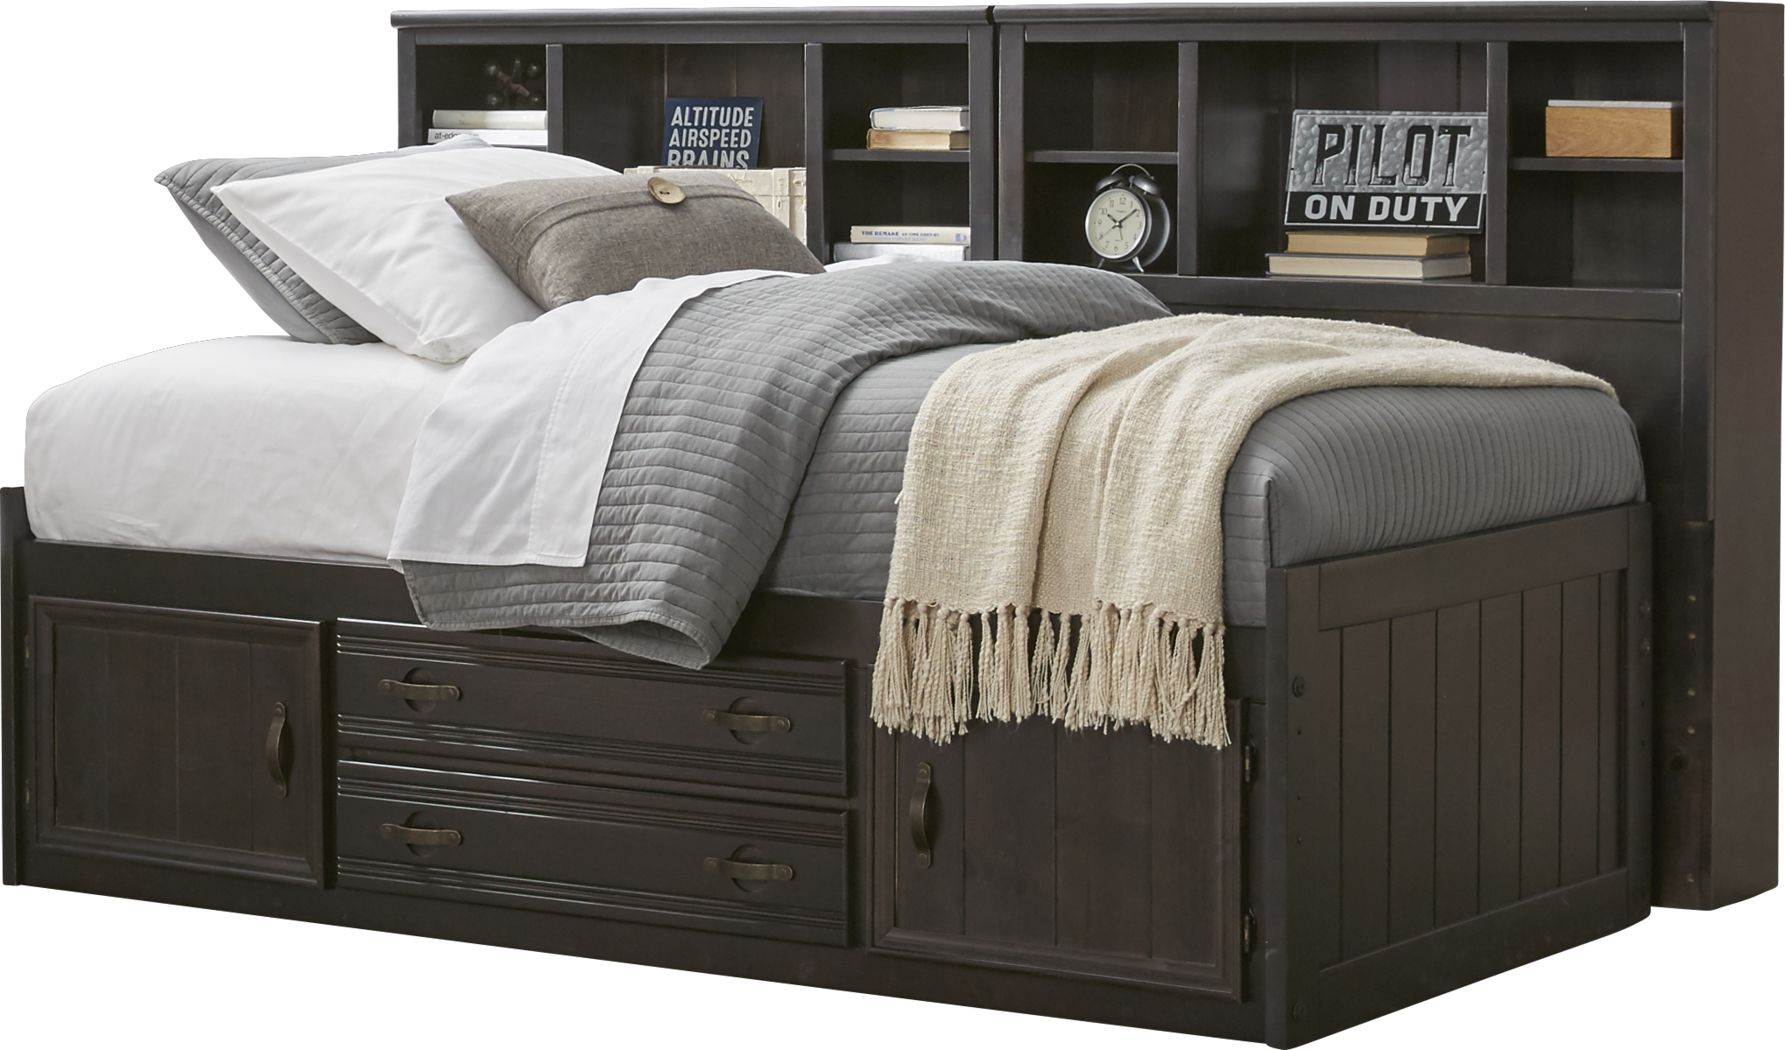 Kids Creekside Charcoal 5 Pc Full, Bookcase Captains Bed Full